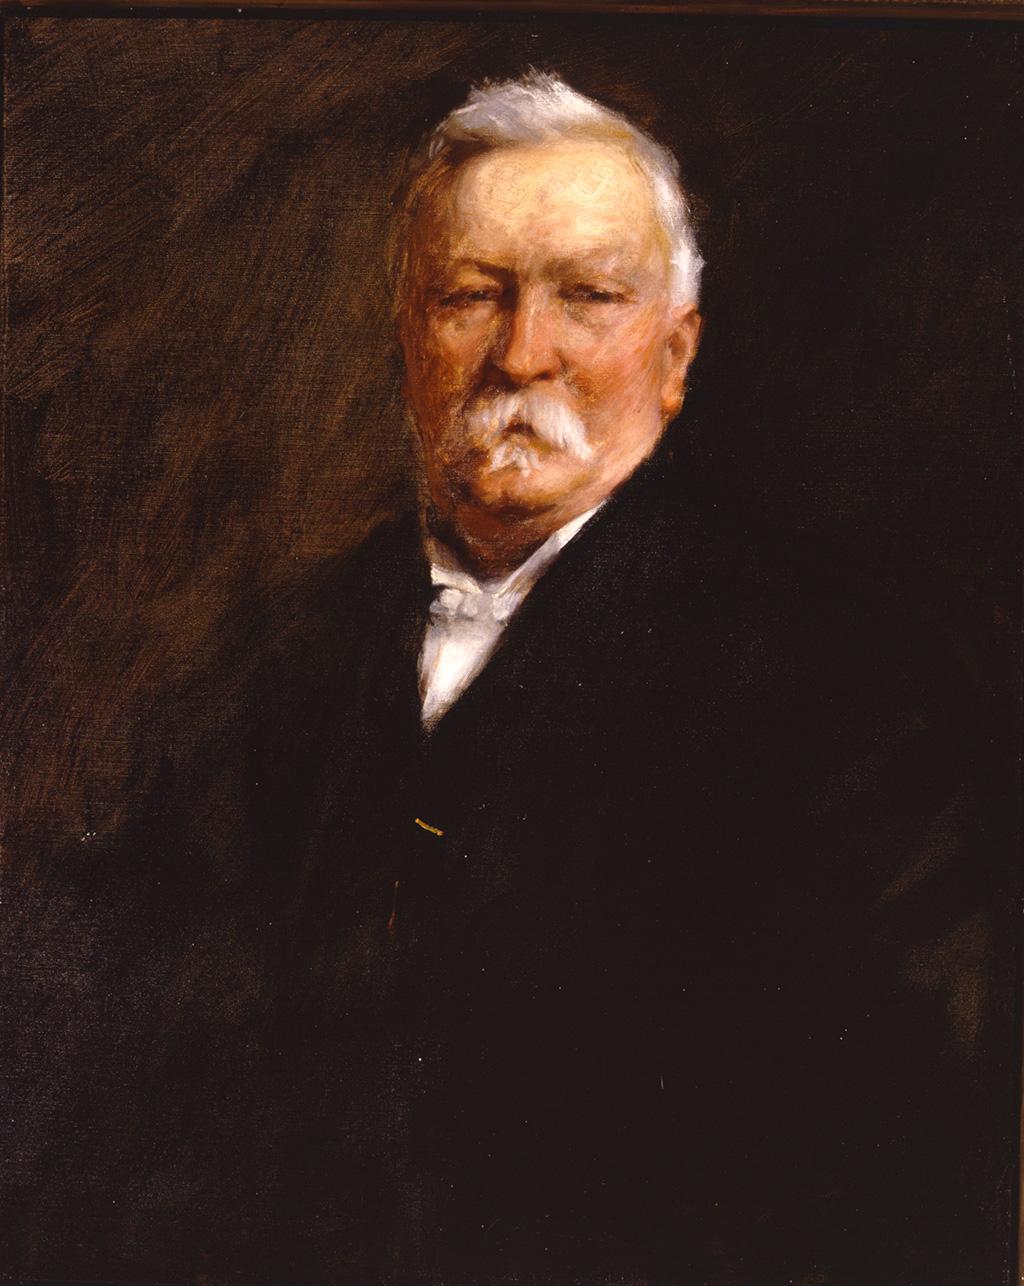 Dr Benjamin Taylor by William Merritt Chase, 1902